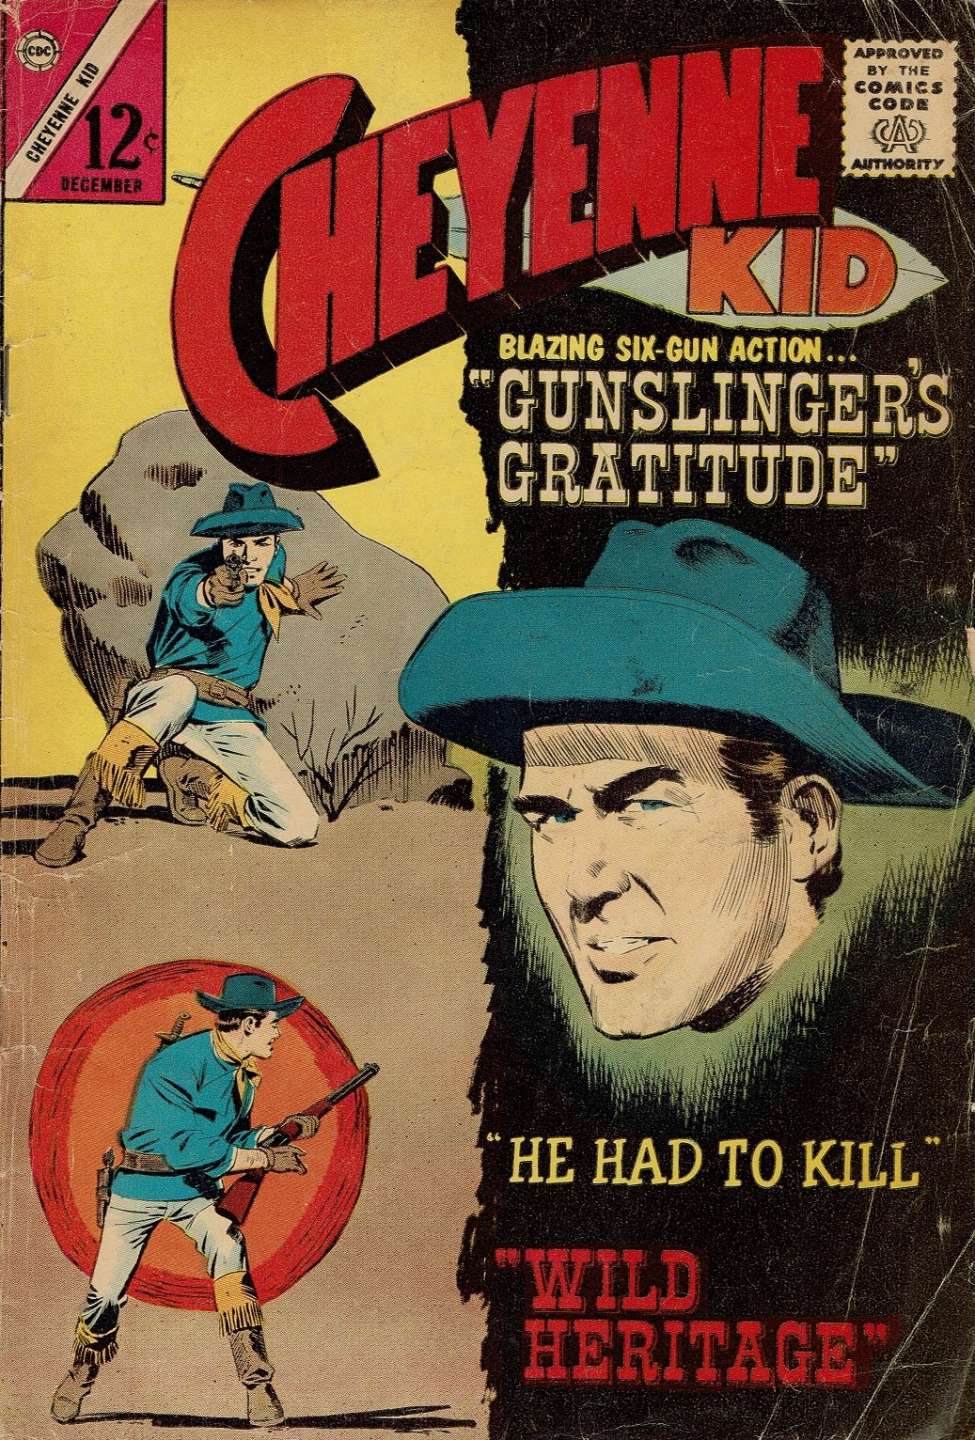 Book Cover For Cheyenne Kid 43